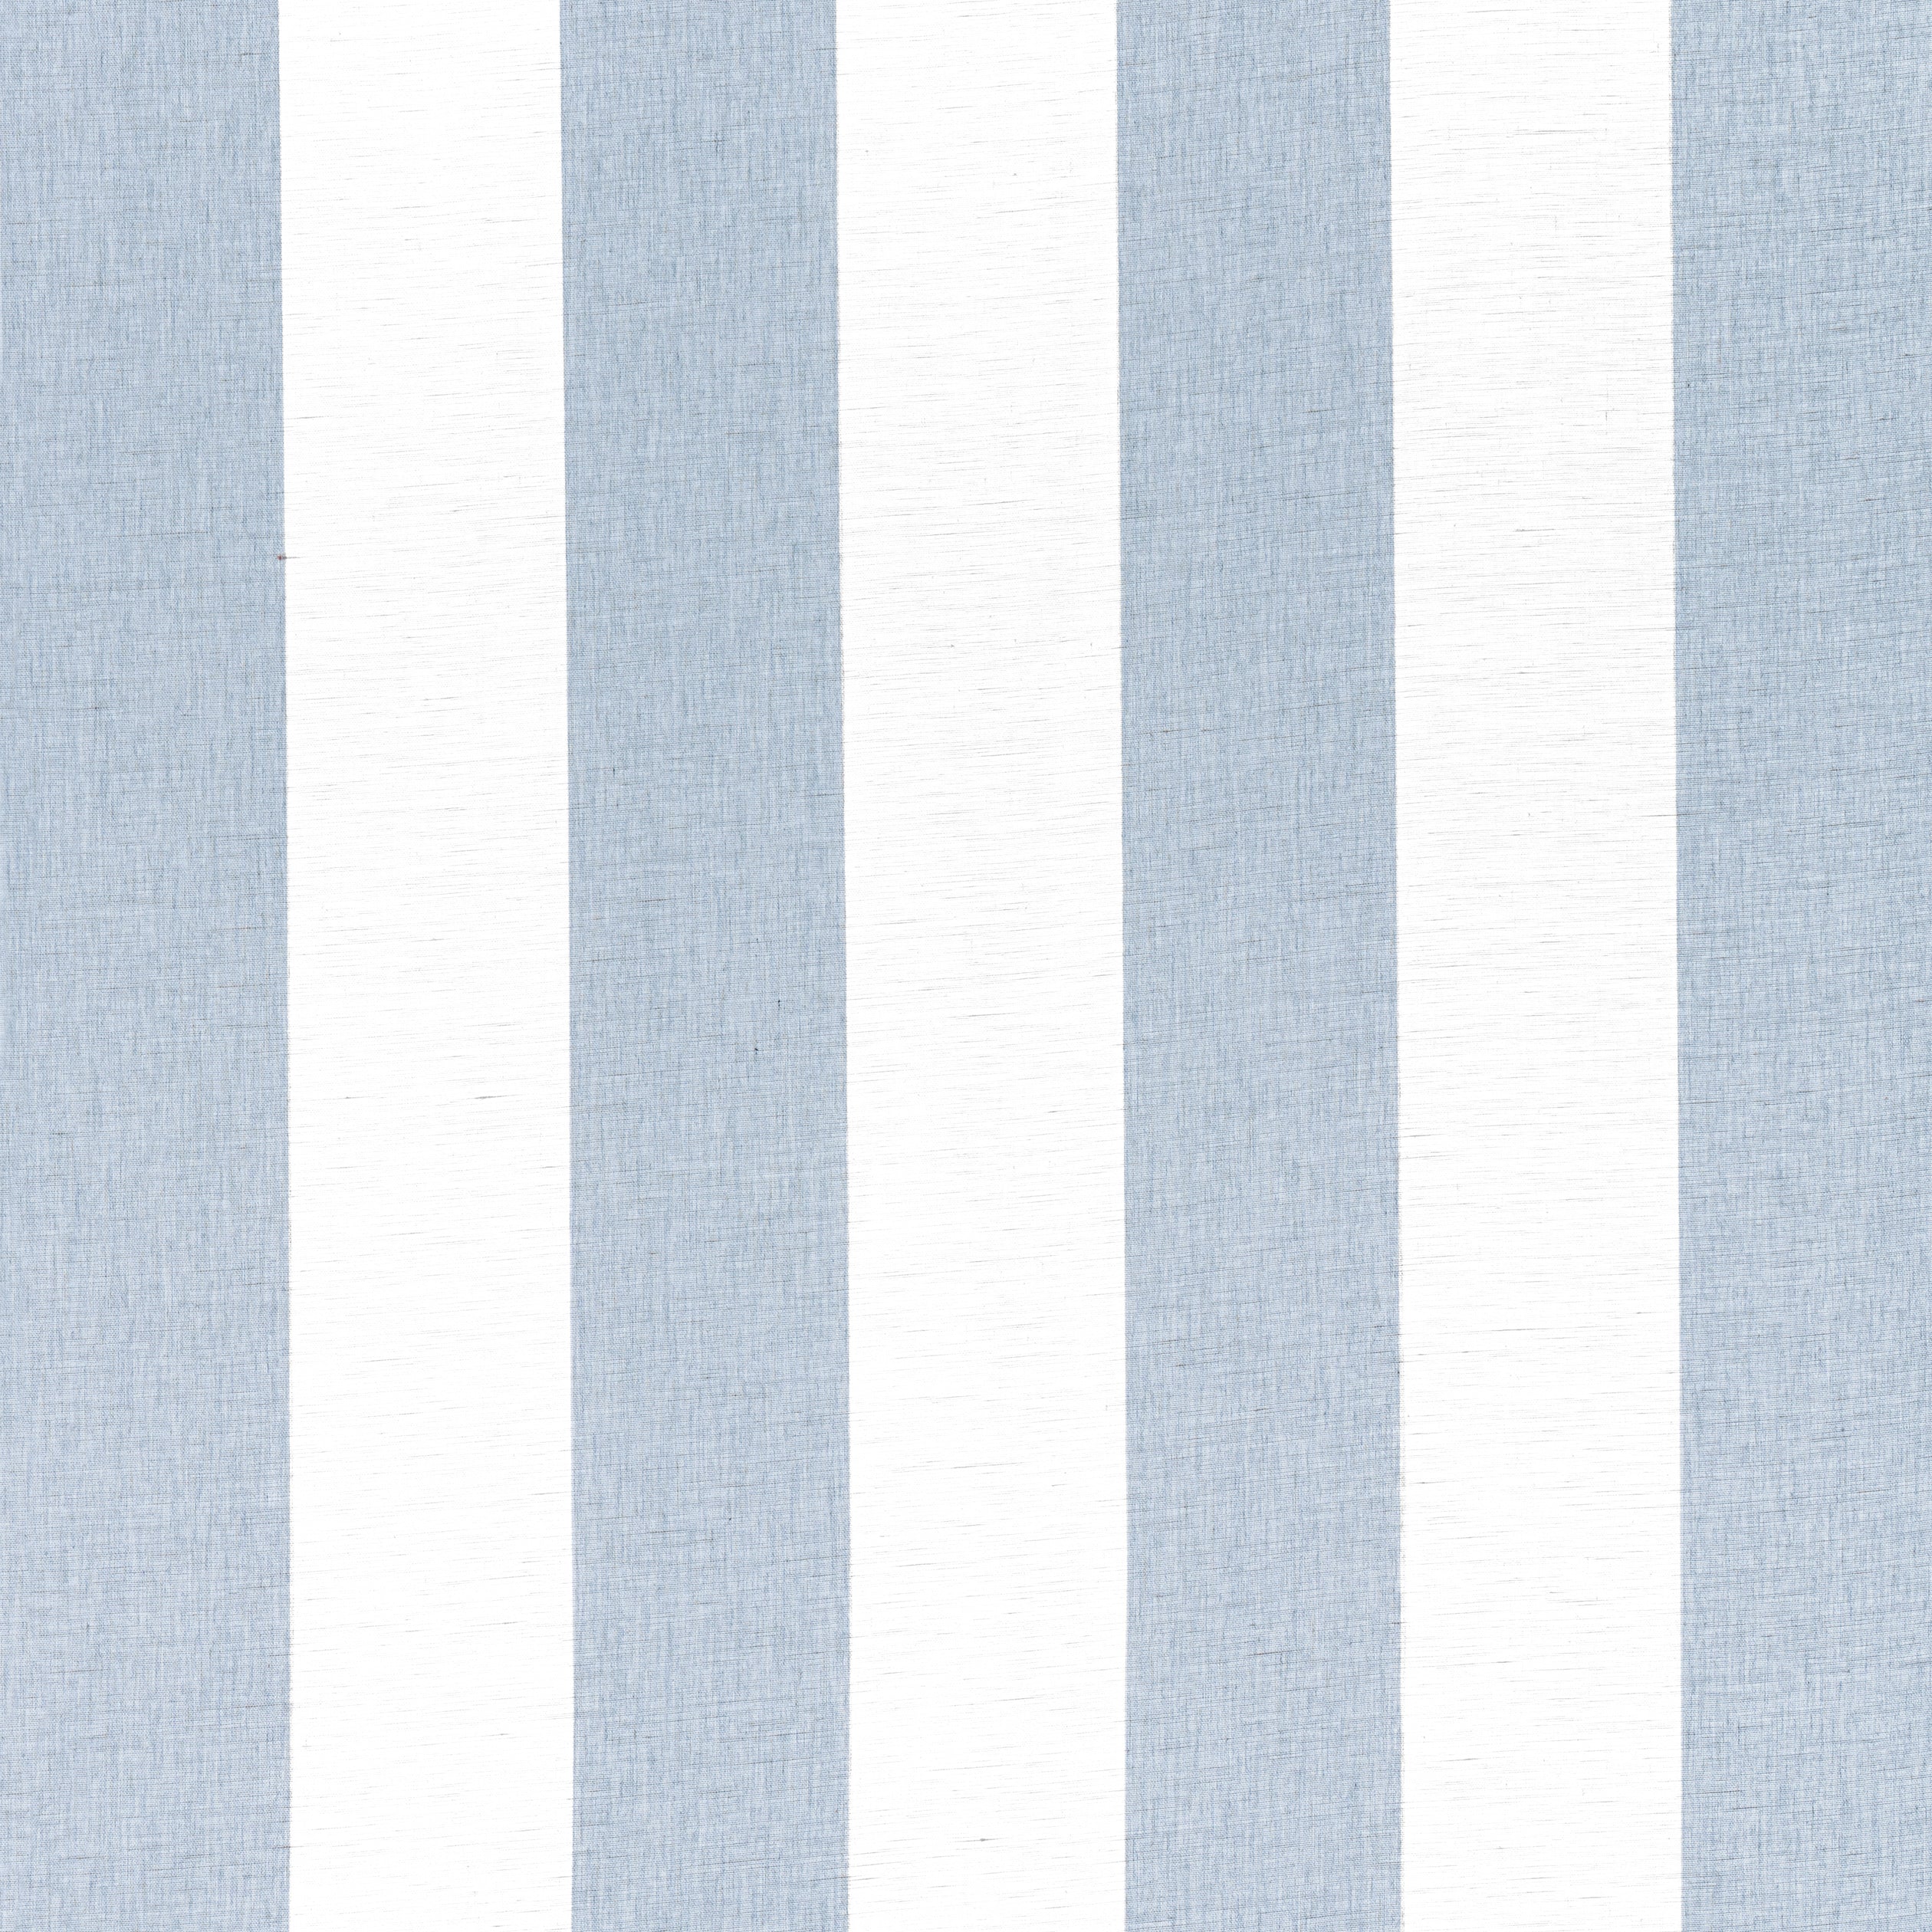 Newport Stripe fabric in navy and white color - pattern number FWW8210 - by Thibaut in the Aura collection